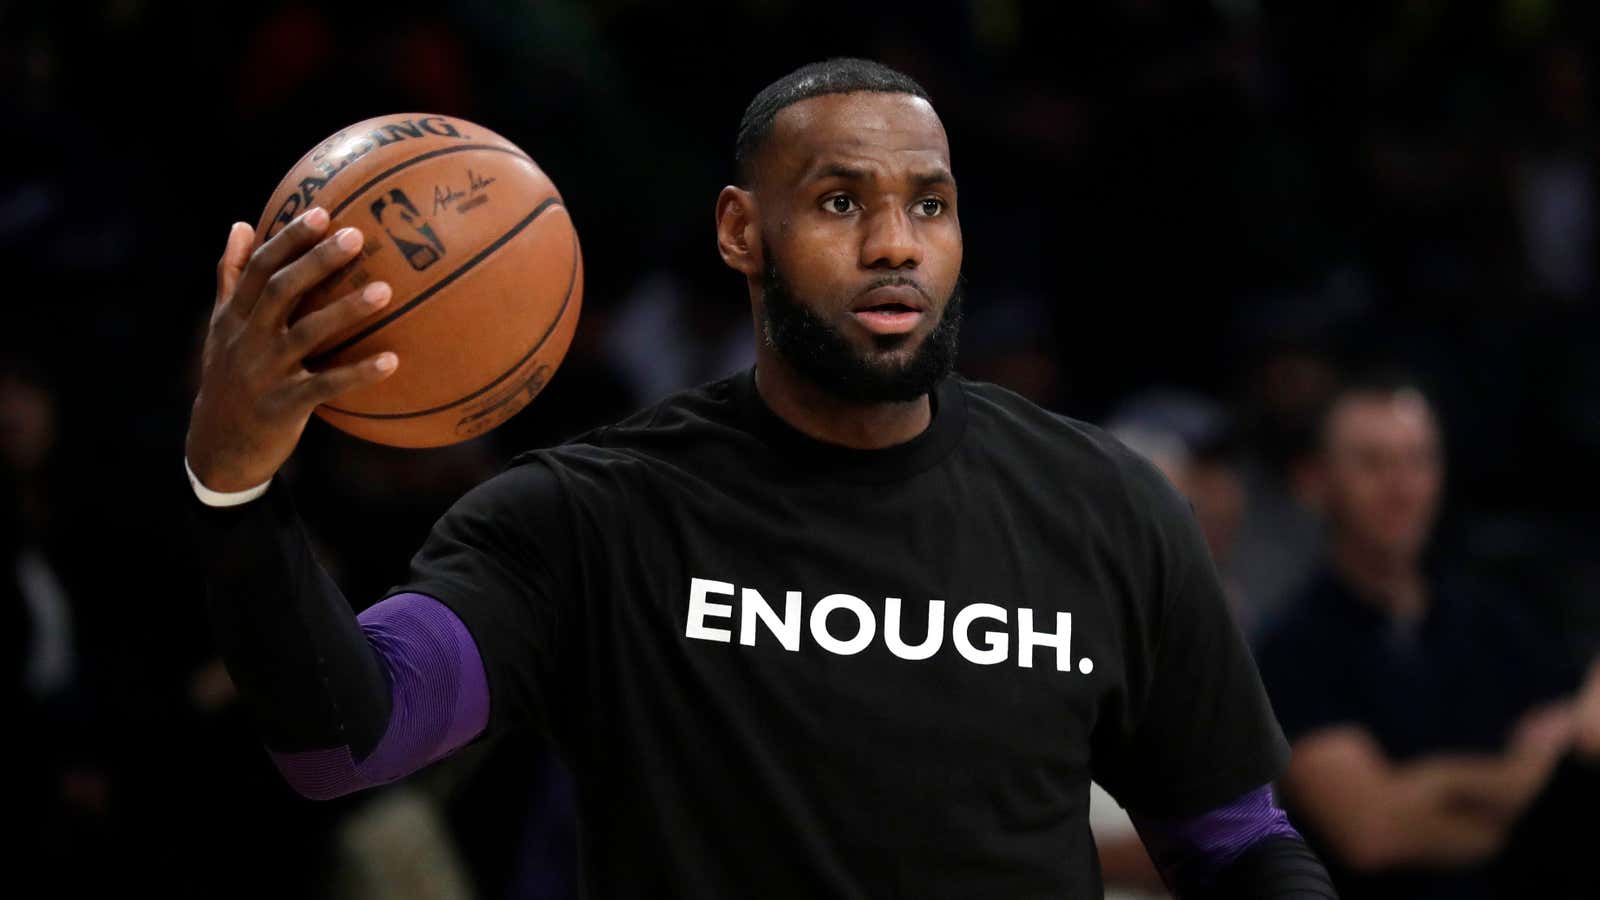 LeBron James wears a shirt to call for action on gun safety following a mass shooting in November 2018.